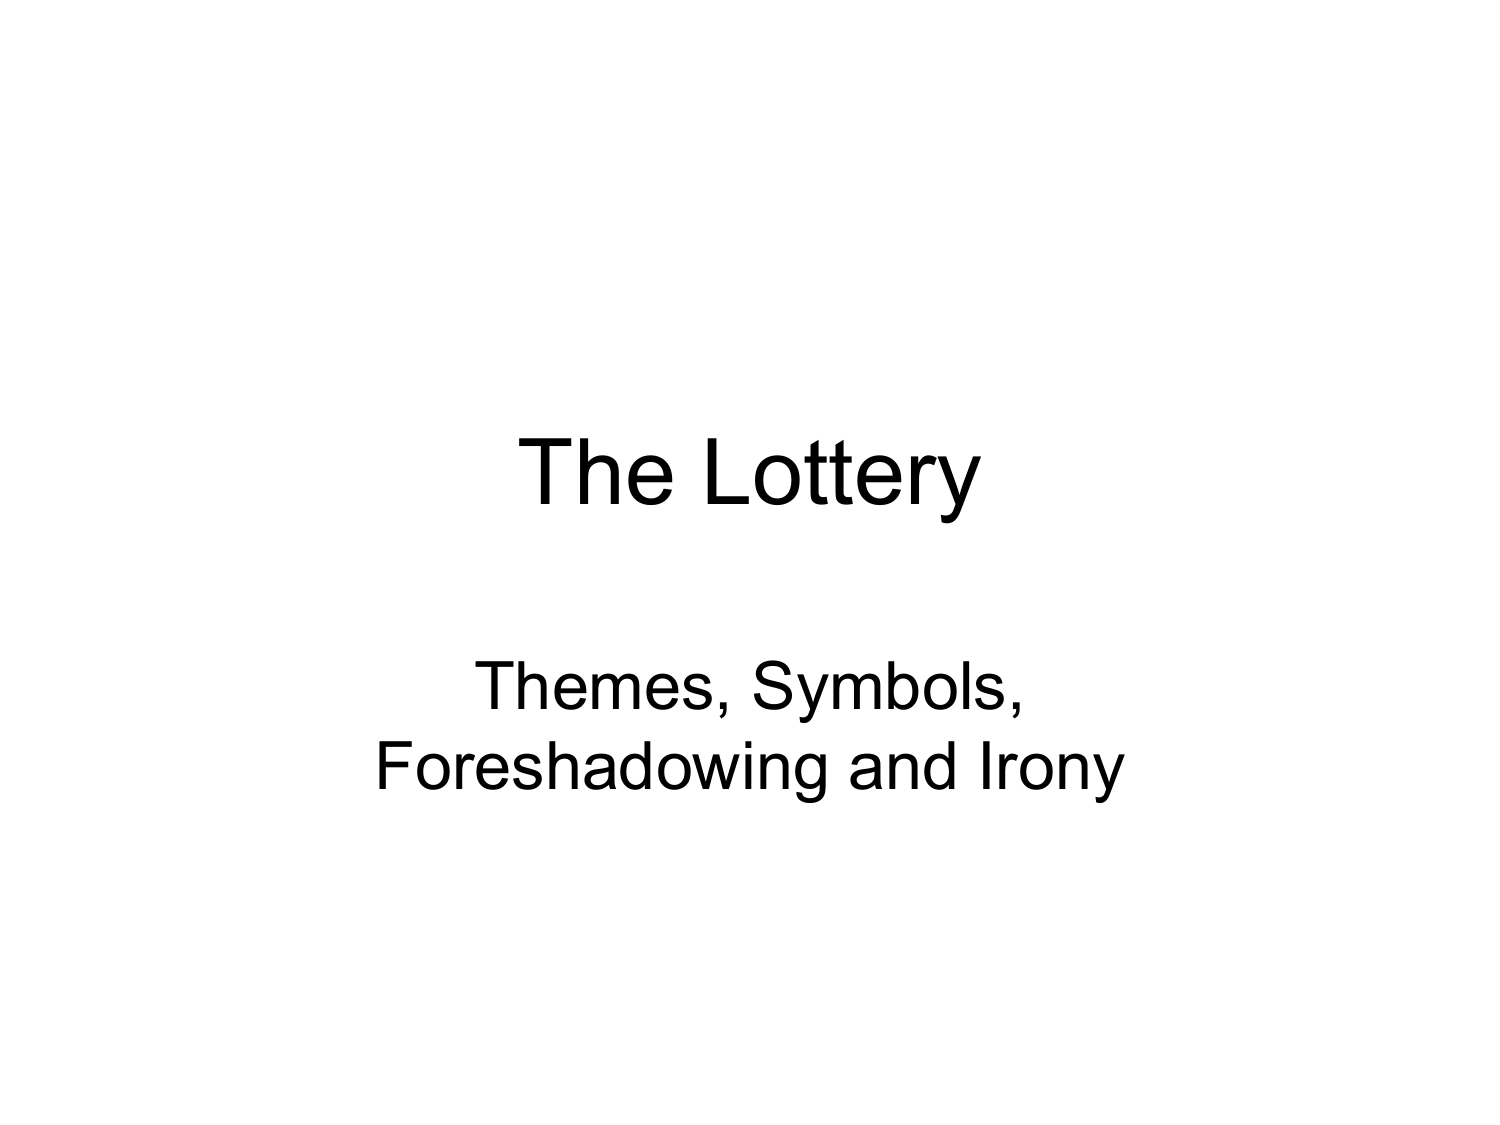 what is the theme for the lottery